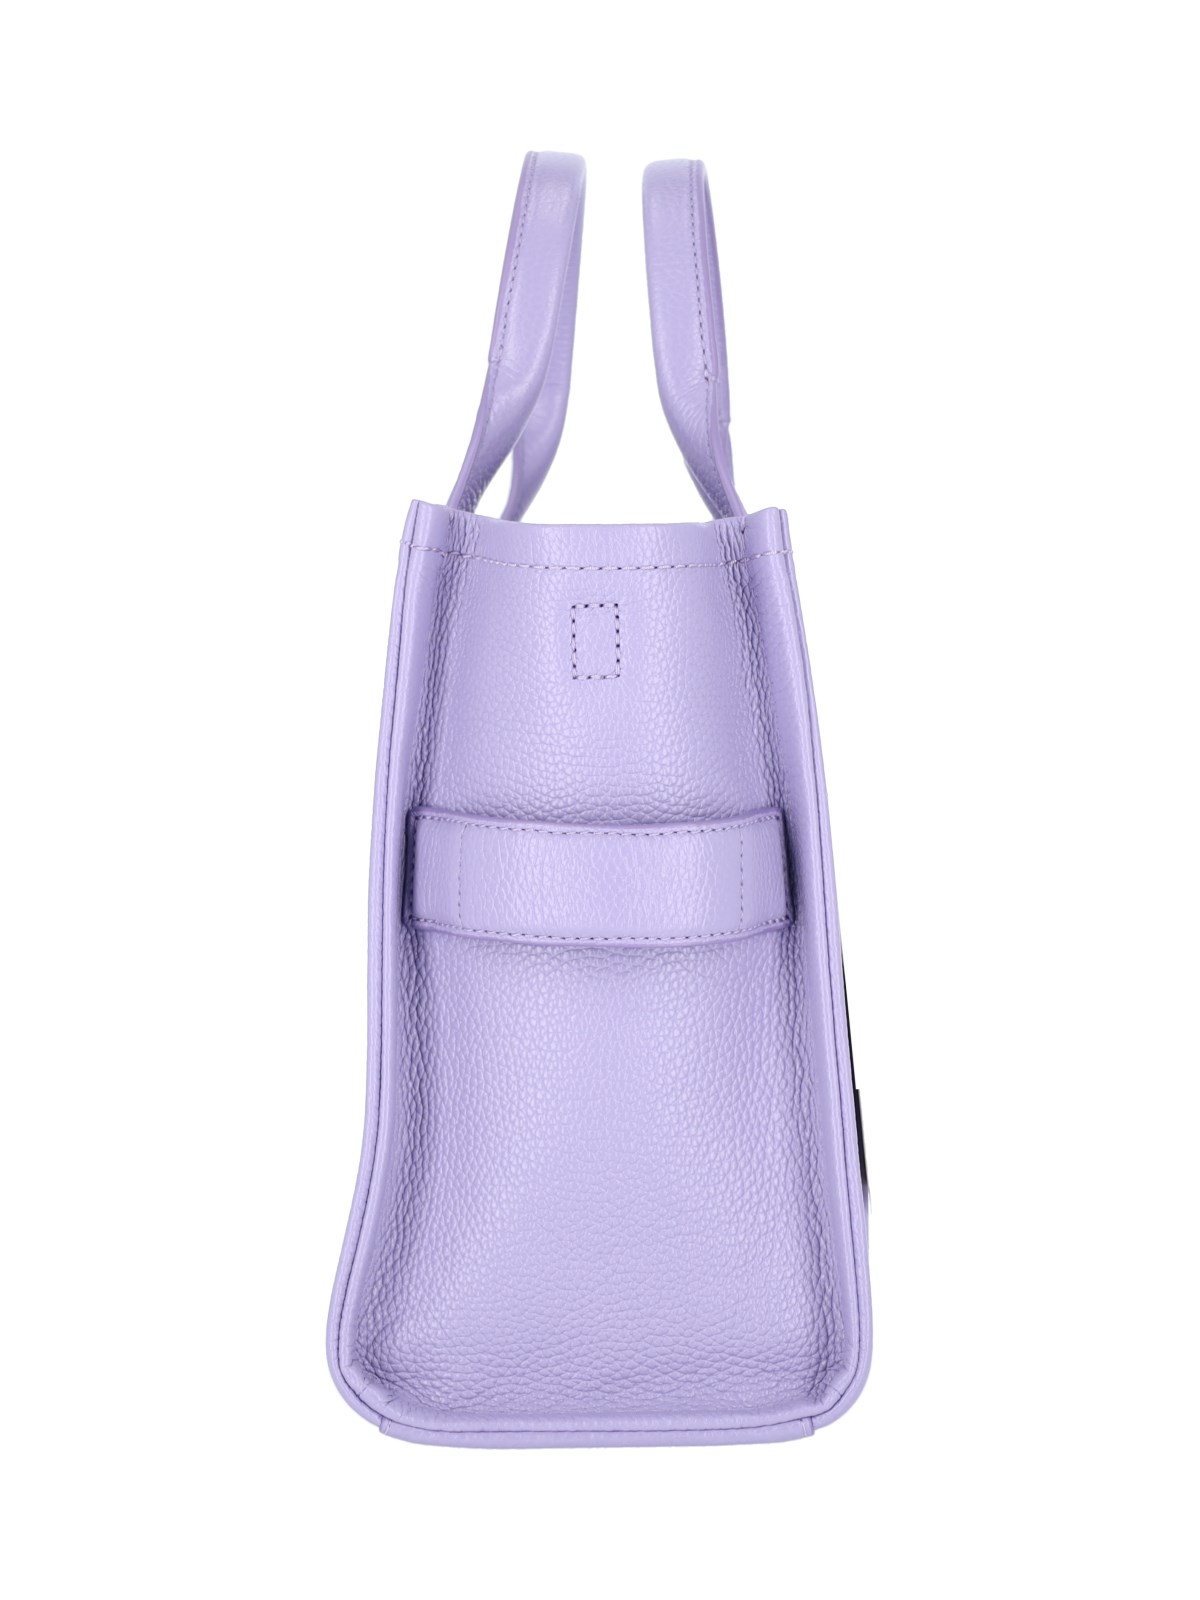 Marc jacobs 'the medium tote' bag available on SUGAR - 136215